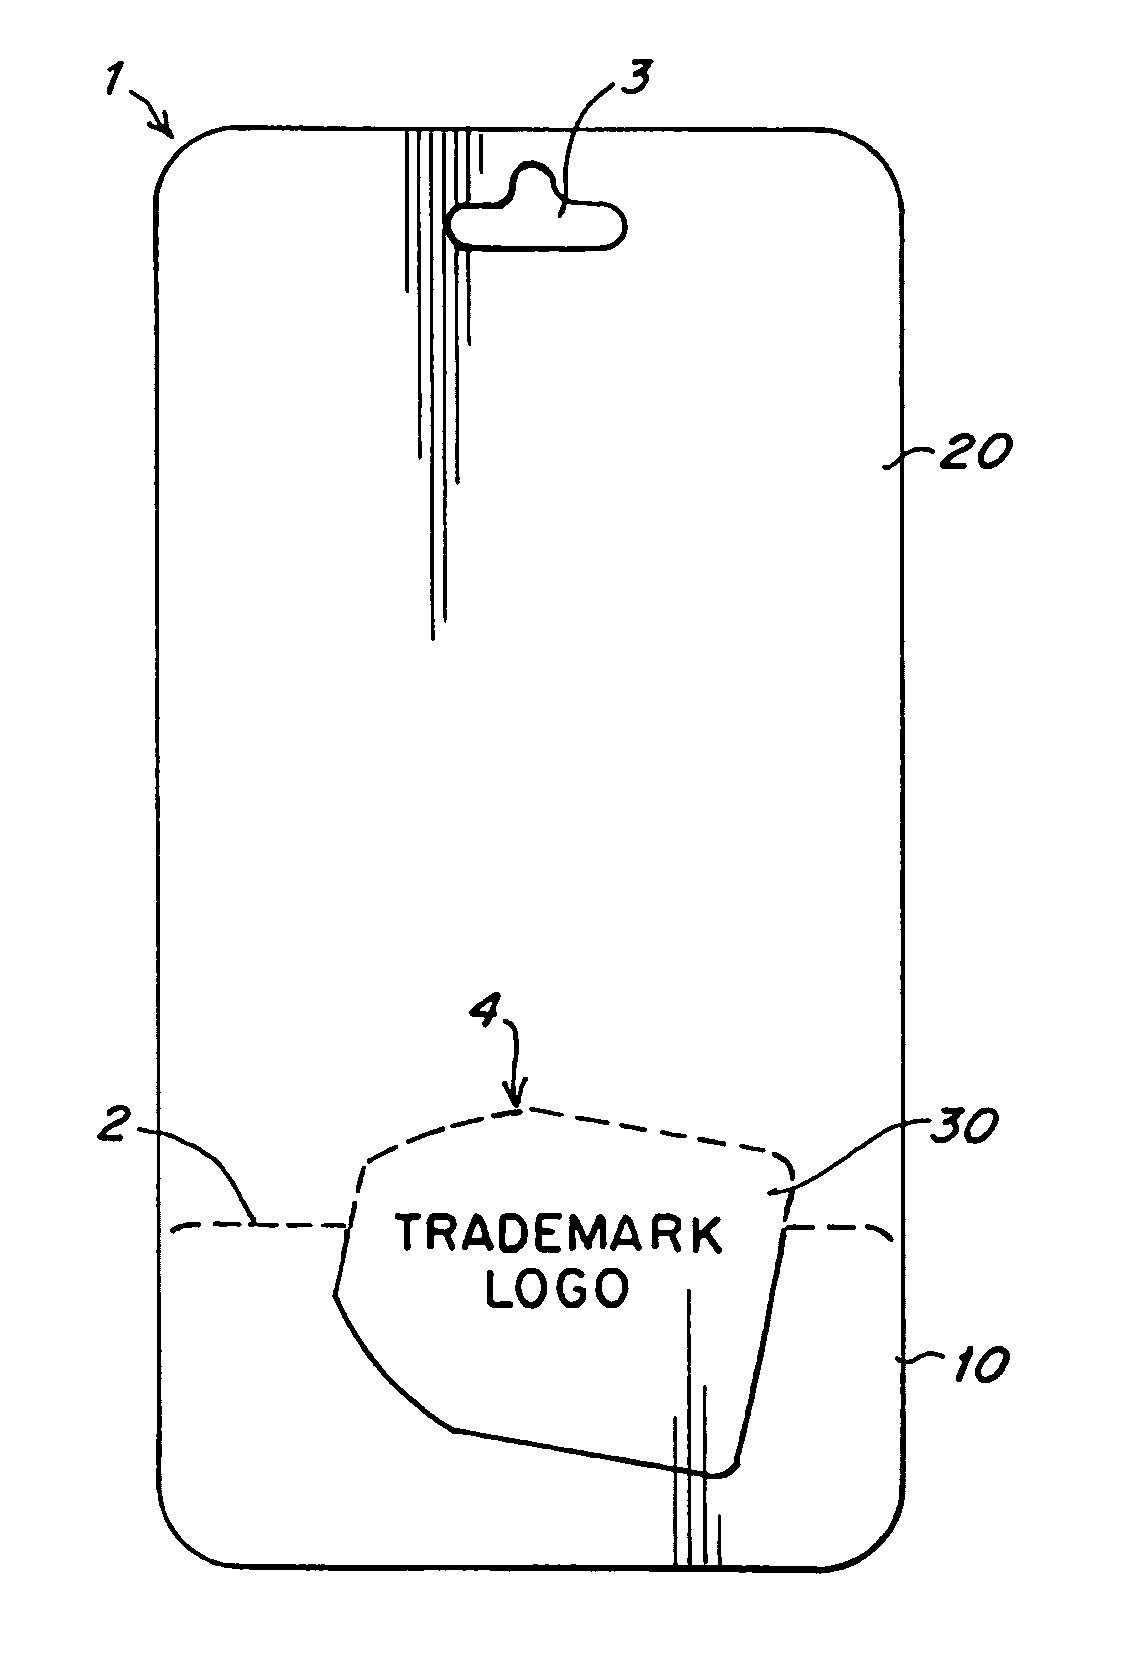 Transaction card with shaped edge